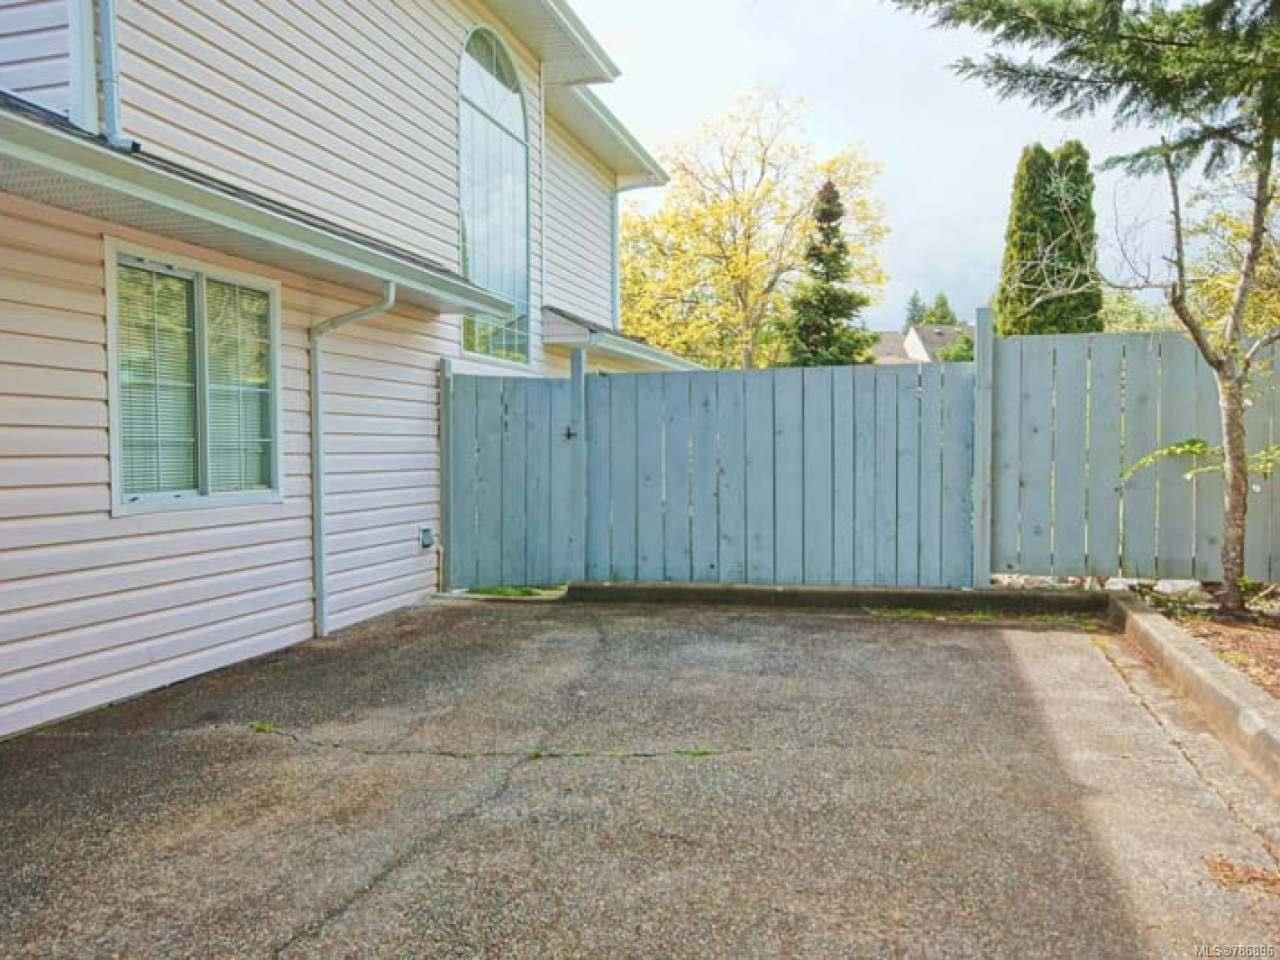 Photo 24: Photos: D 249 CORFIELD STREET in PARKSVILLE: PQ Parksville Row/Townhouse for sale (Parksville/Qualicum)  : MLS®# 786896